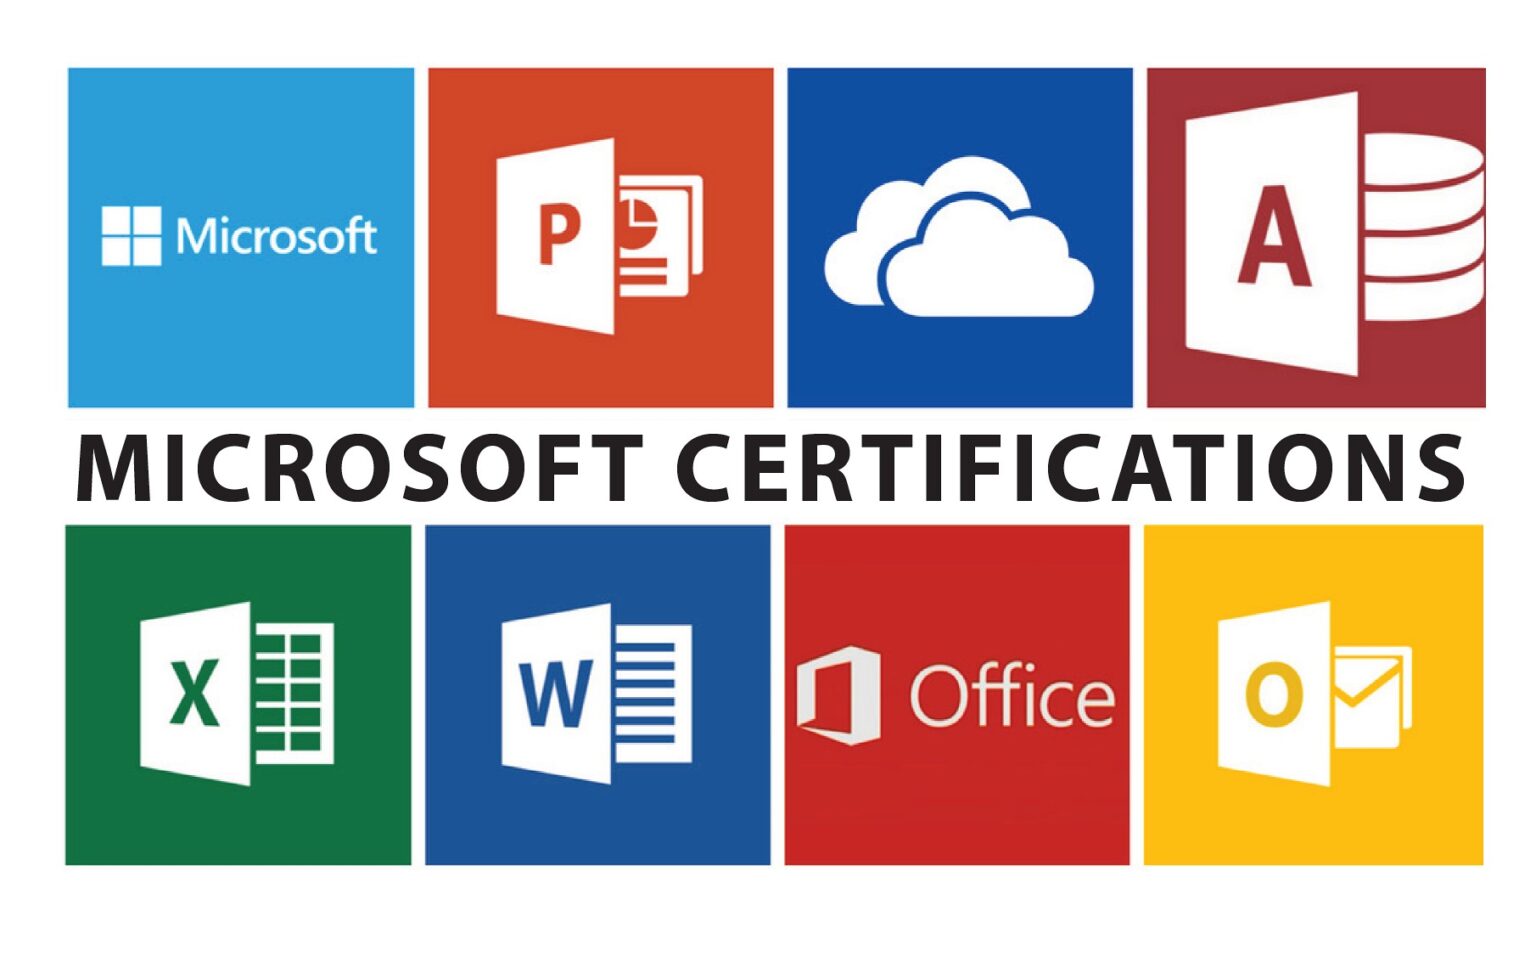 Microsoft Azure is a growing cloud provider. Find out how to pursue a career path with Microsoft Azure by getting certifications.